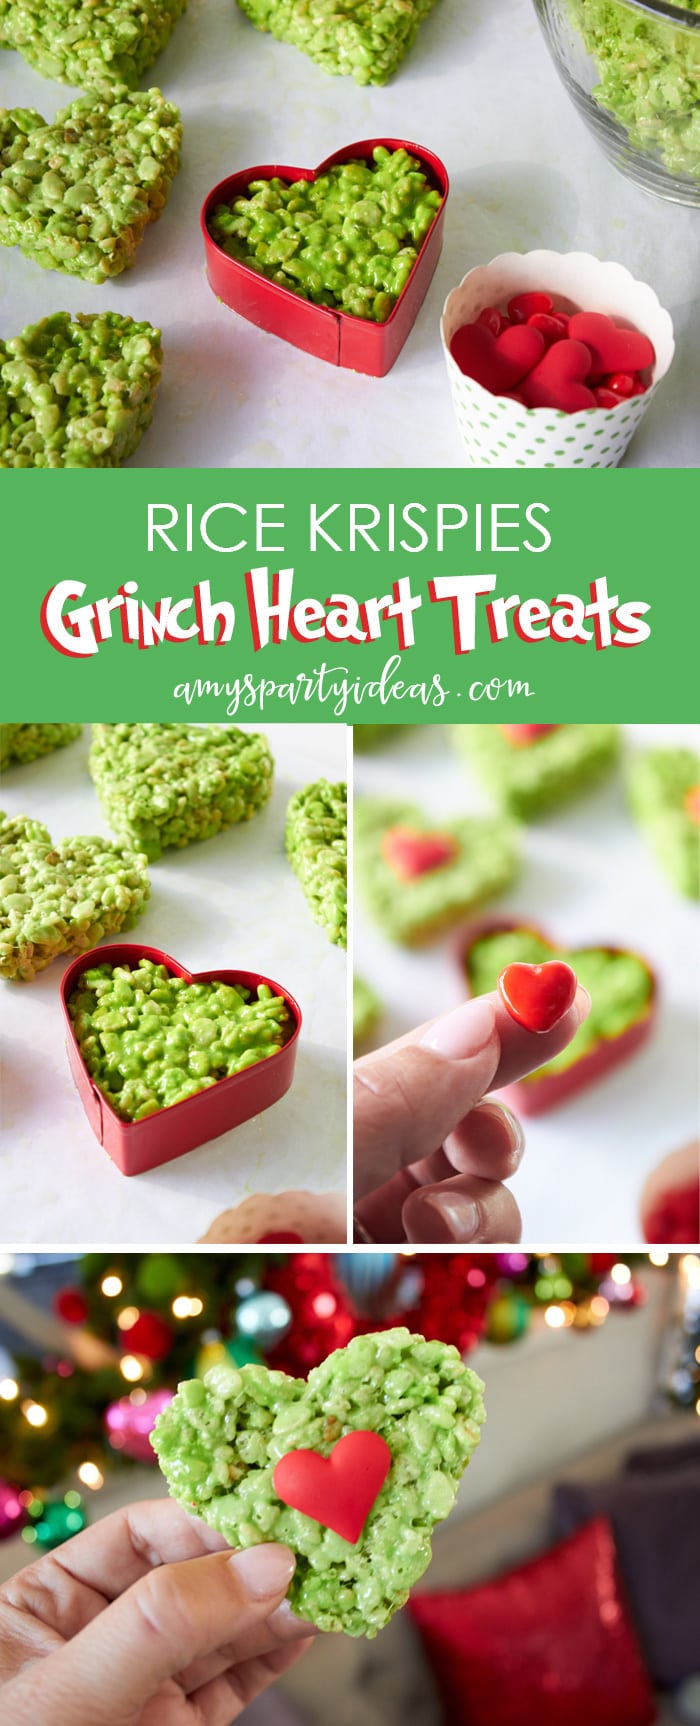 10 Amazing Tips for a Whobilicious Family Grinch Night! || Rice Krispies Grinch Heart Sweets via Amy’s Party Ideas || Grinch Night! A Fun Family Christmas Tradition! || Letters from Santa Holiday Blog